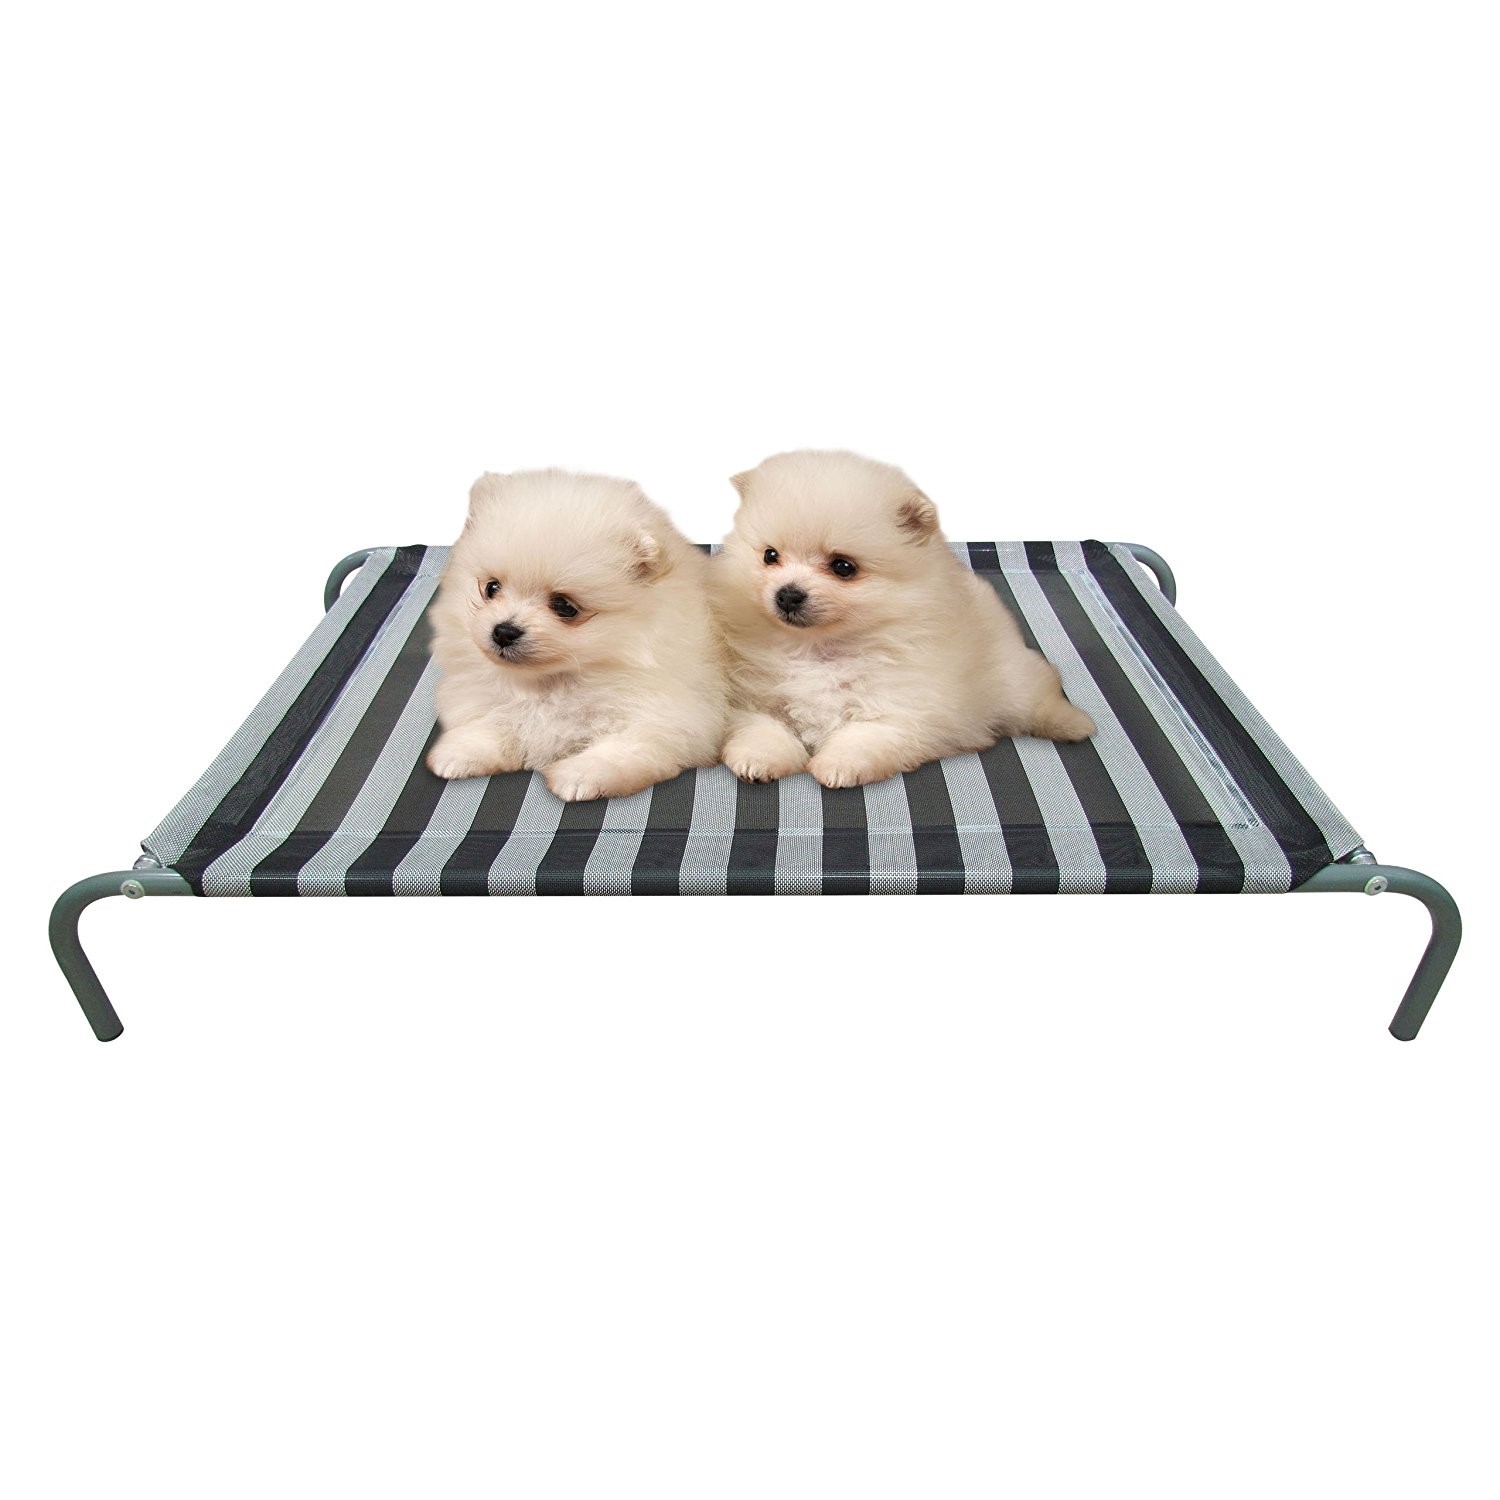 Cooling Dog Bed – Find the Best Elevated Dog Bed to Keep Your Pet Cool